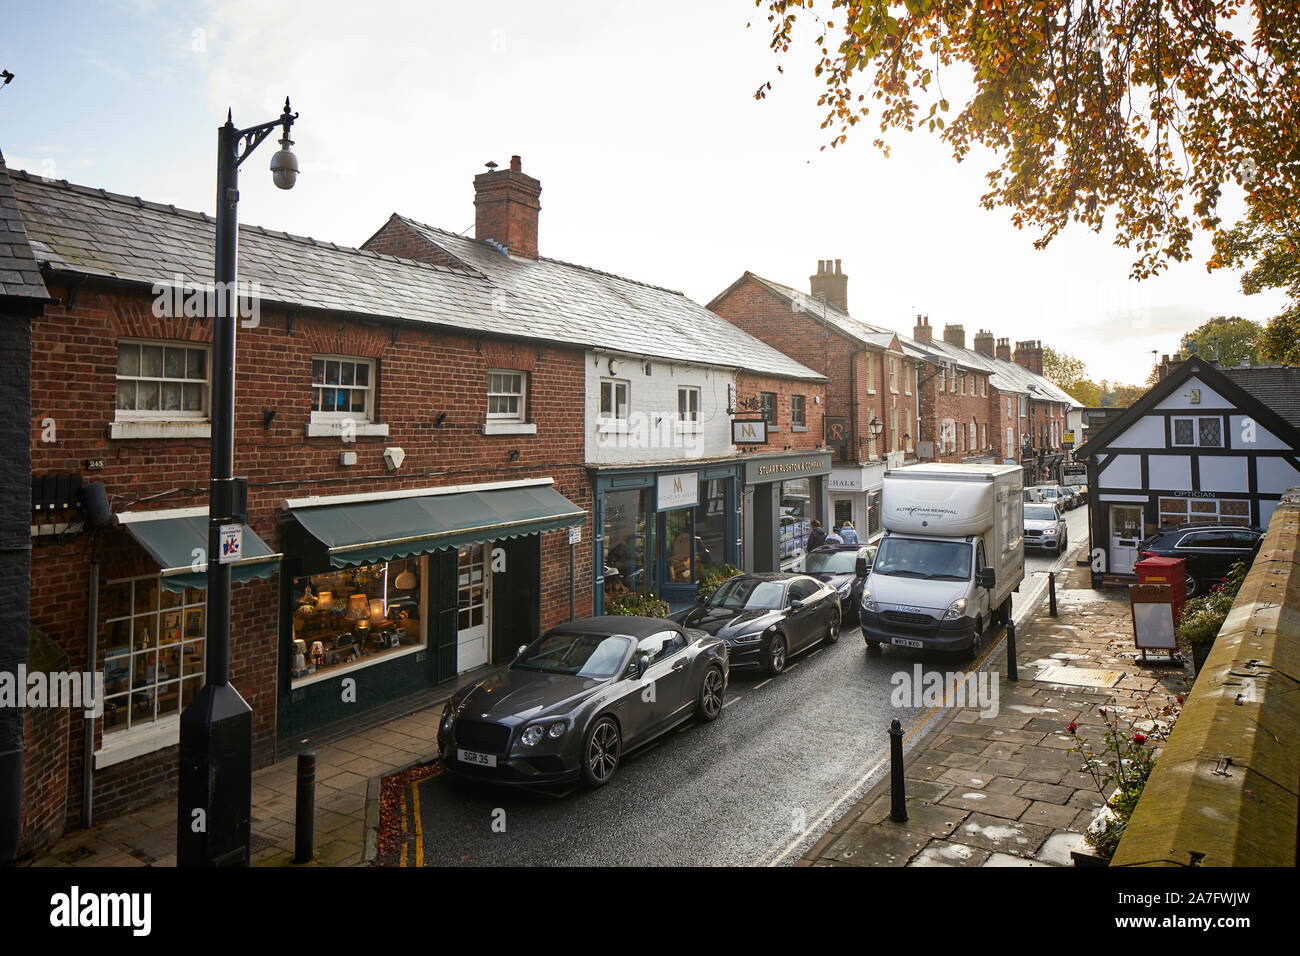 Knutsford town, Cheshire. King street the main shopping street narrow street with parked cars Stock Photo